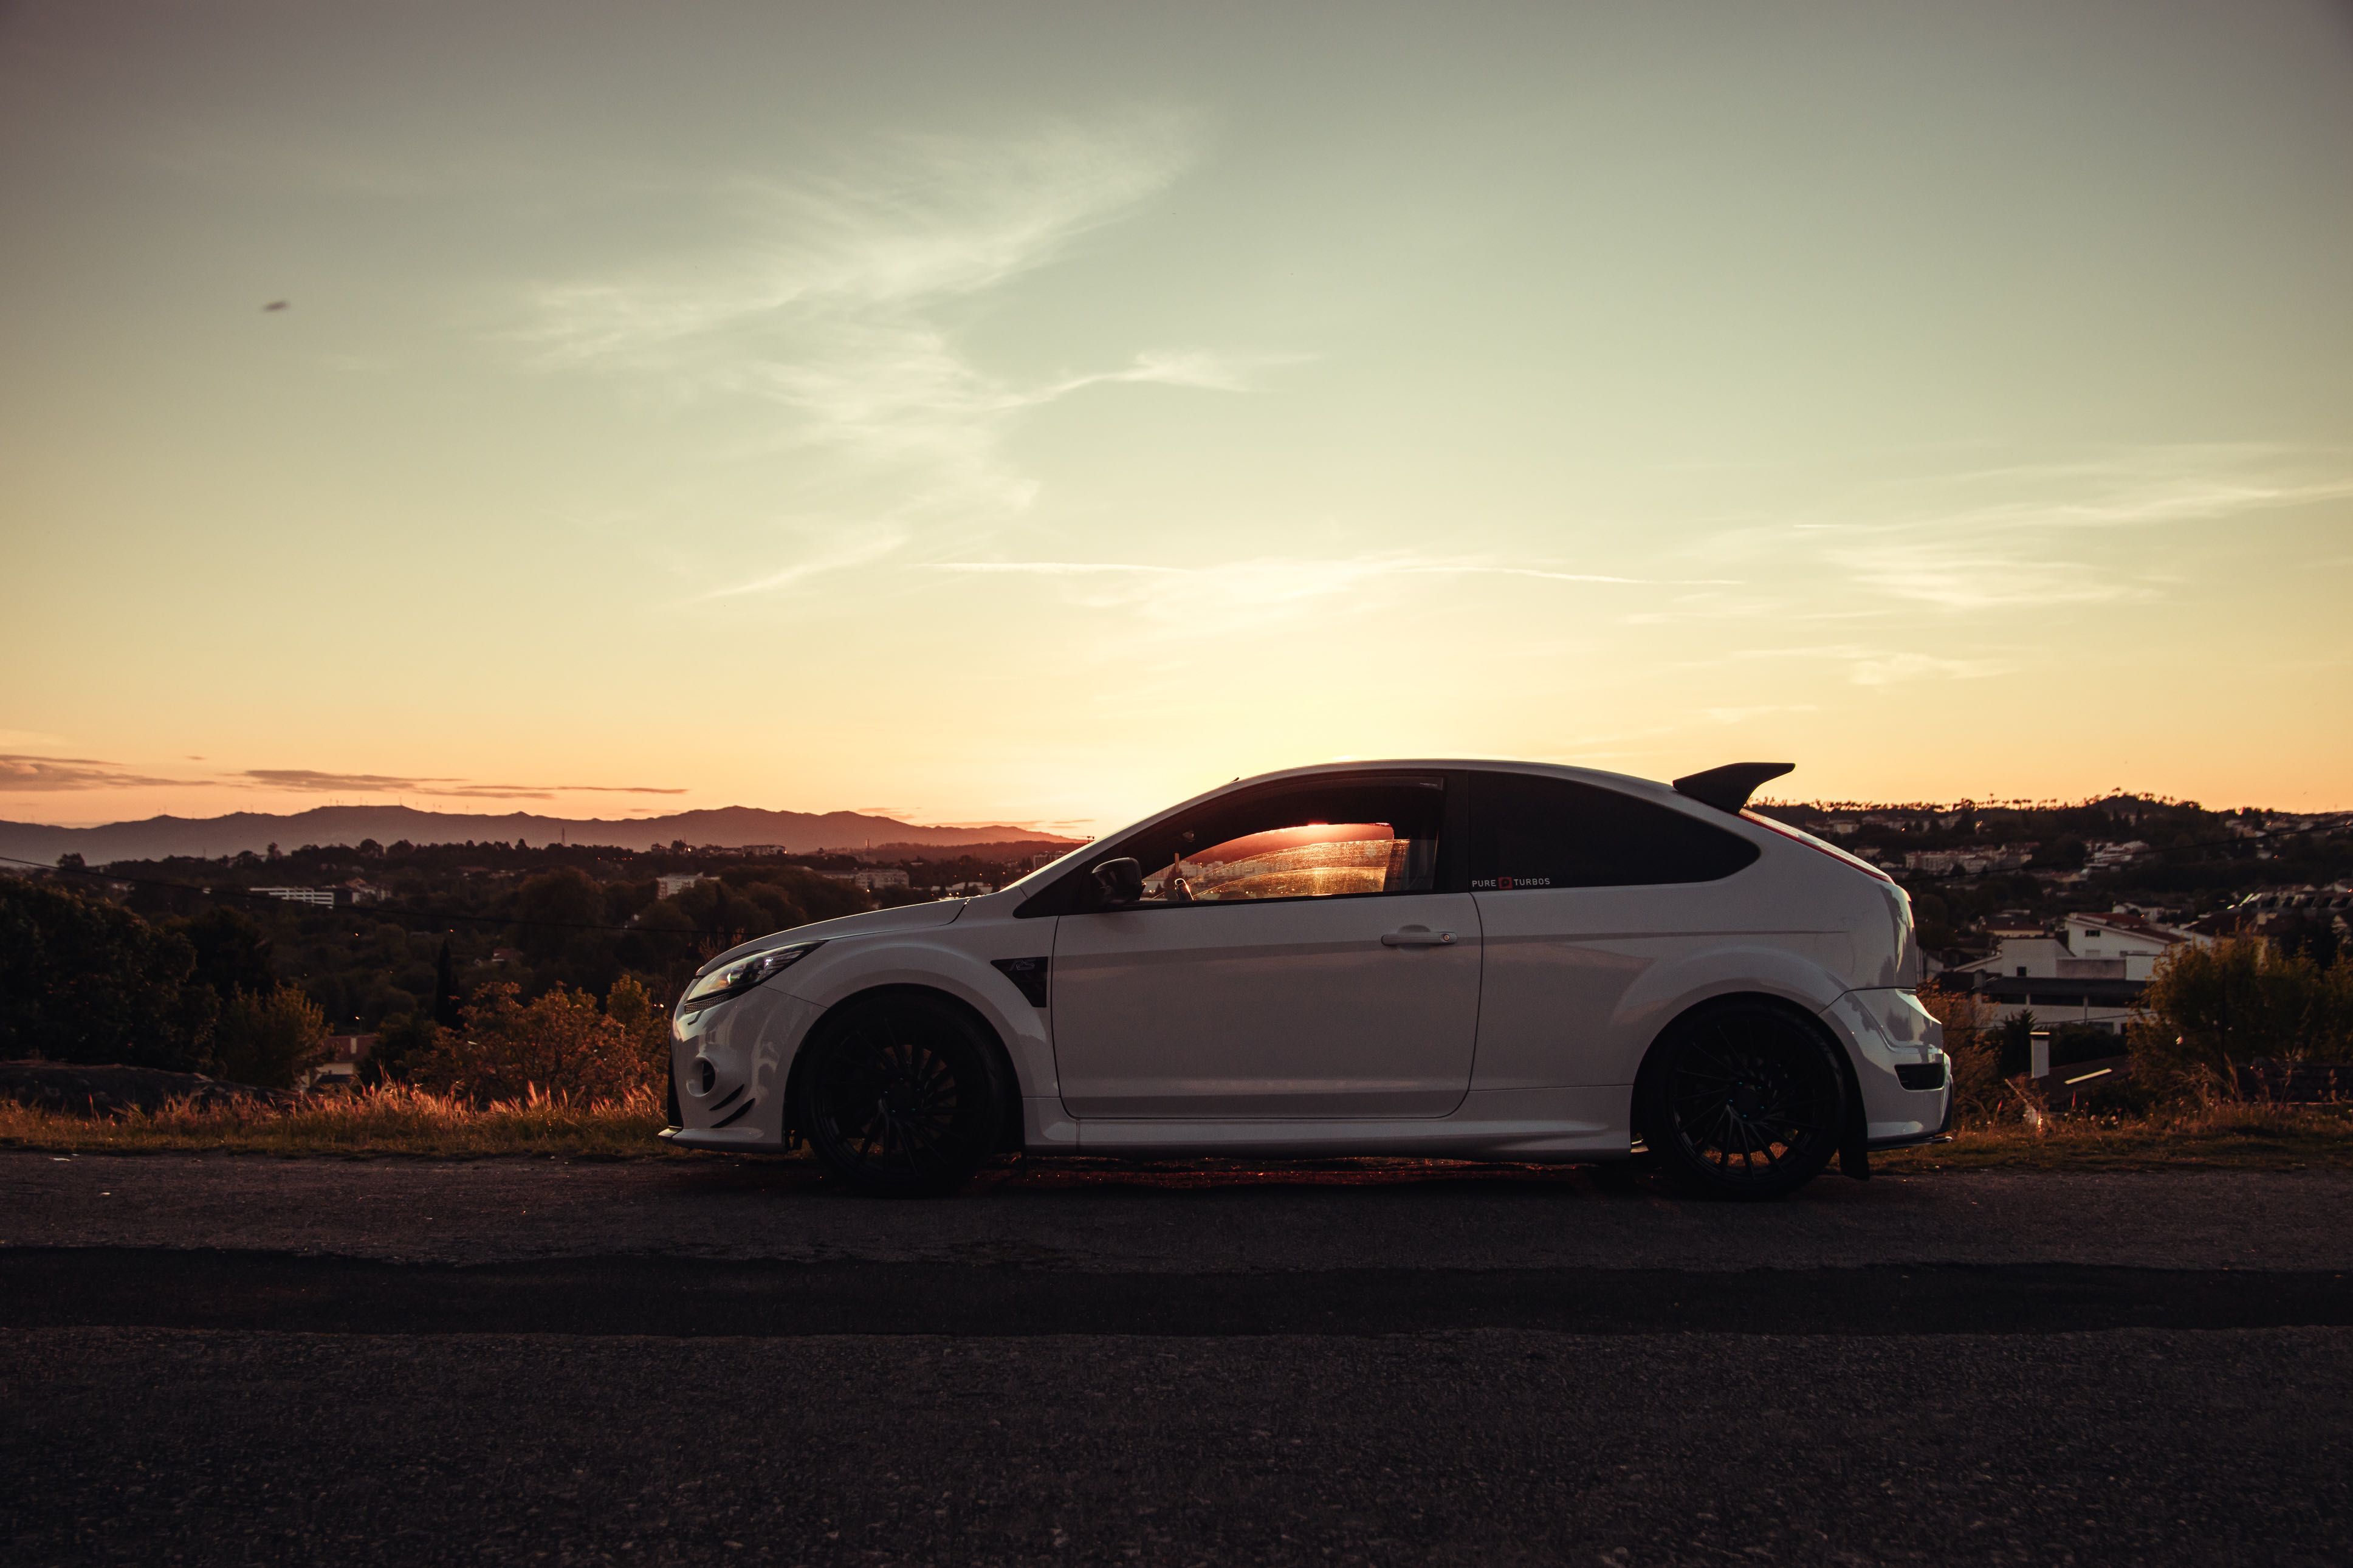 Ford Focus Rs Mk2